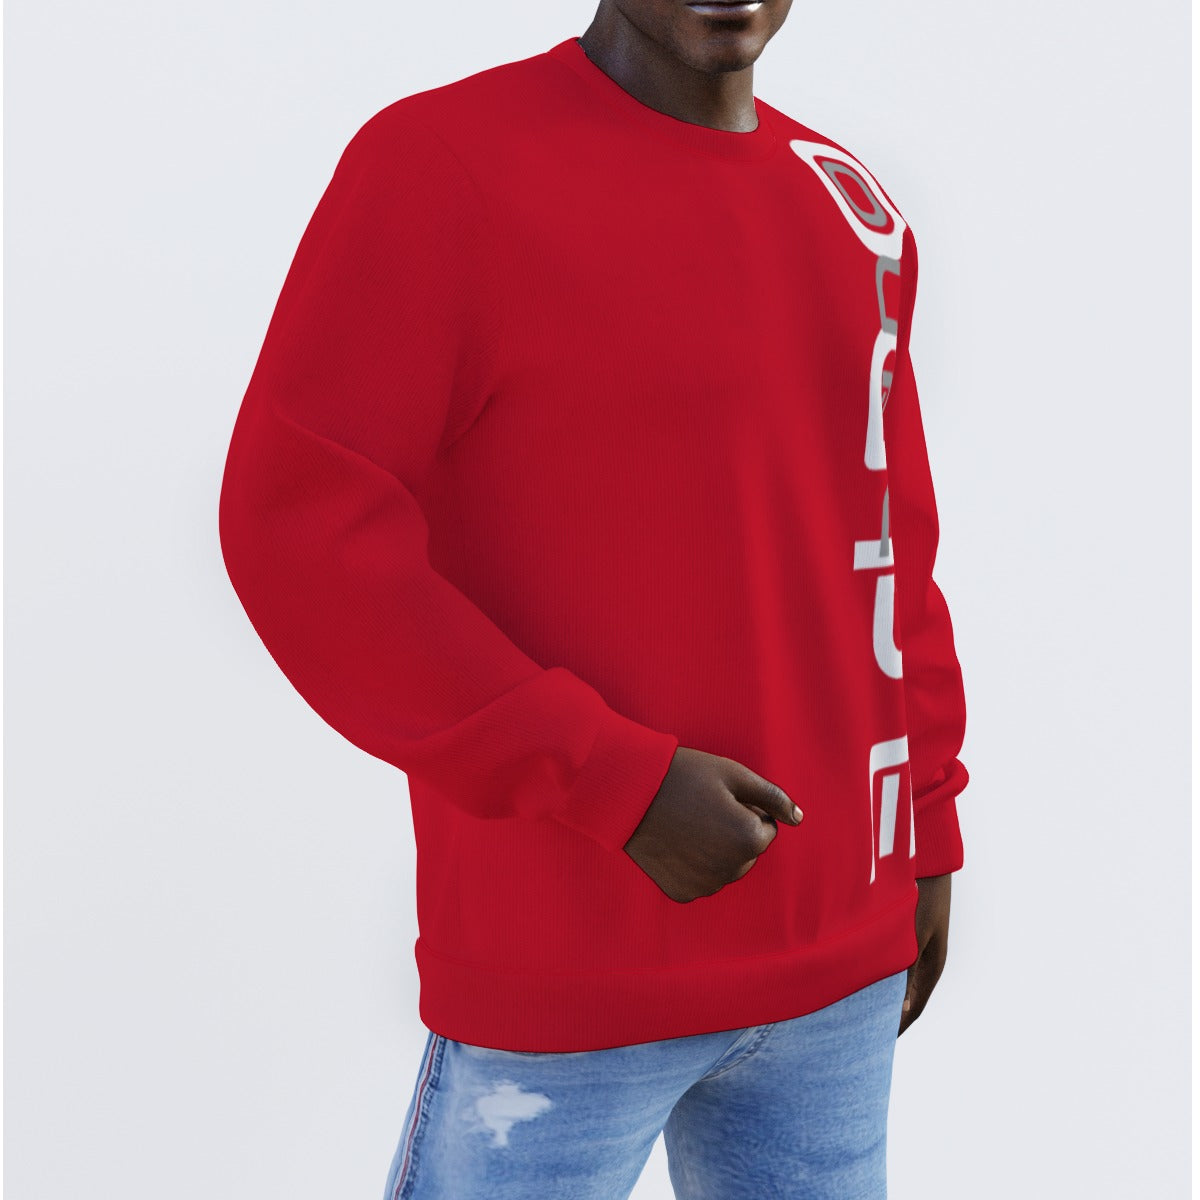 OUP OUPE RED Men's Sweater